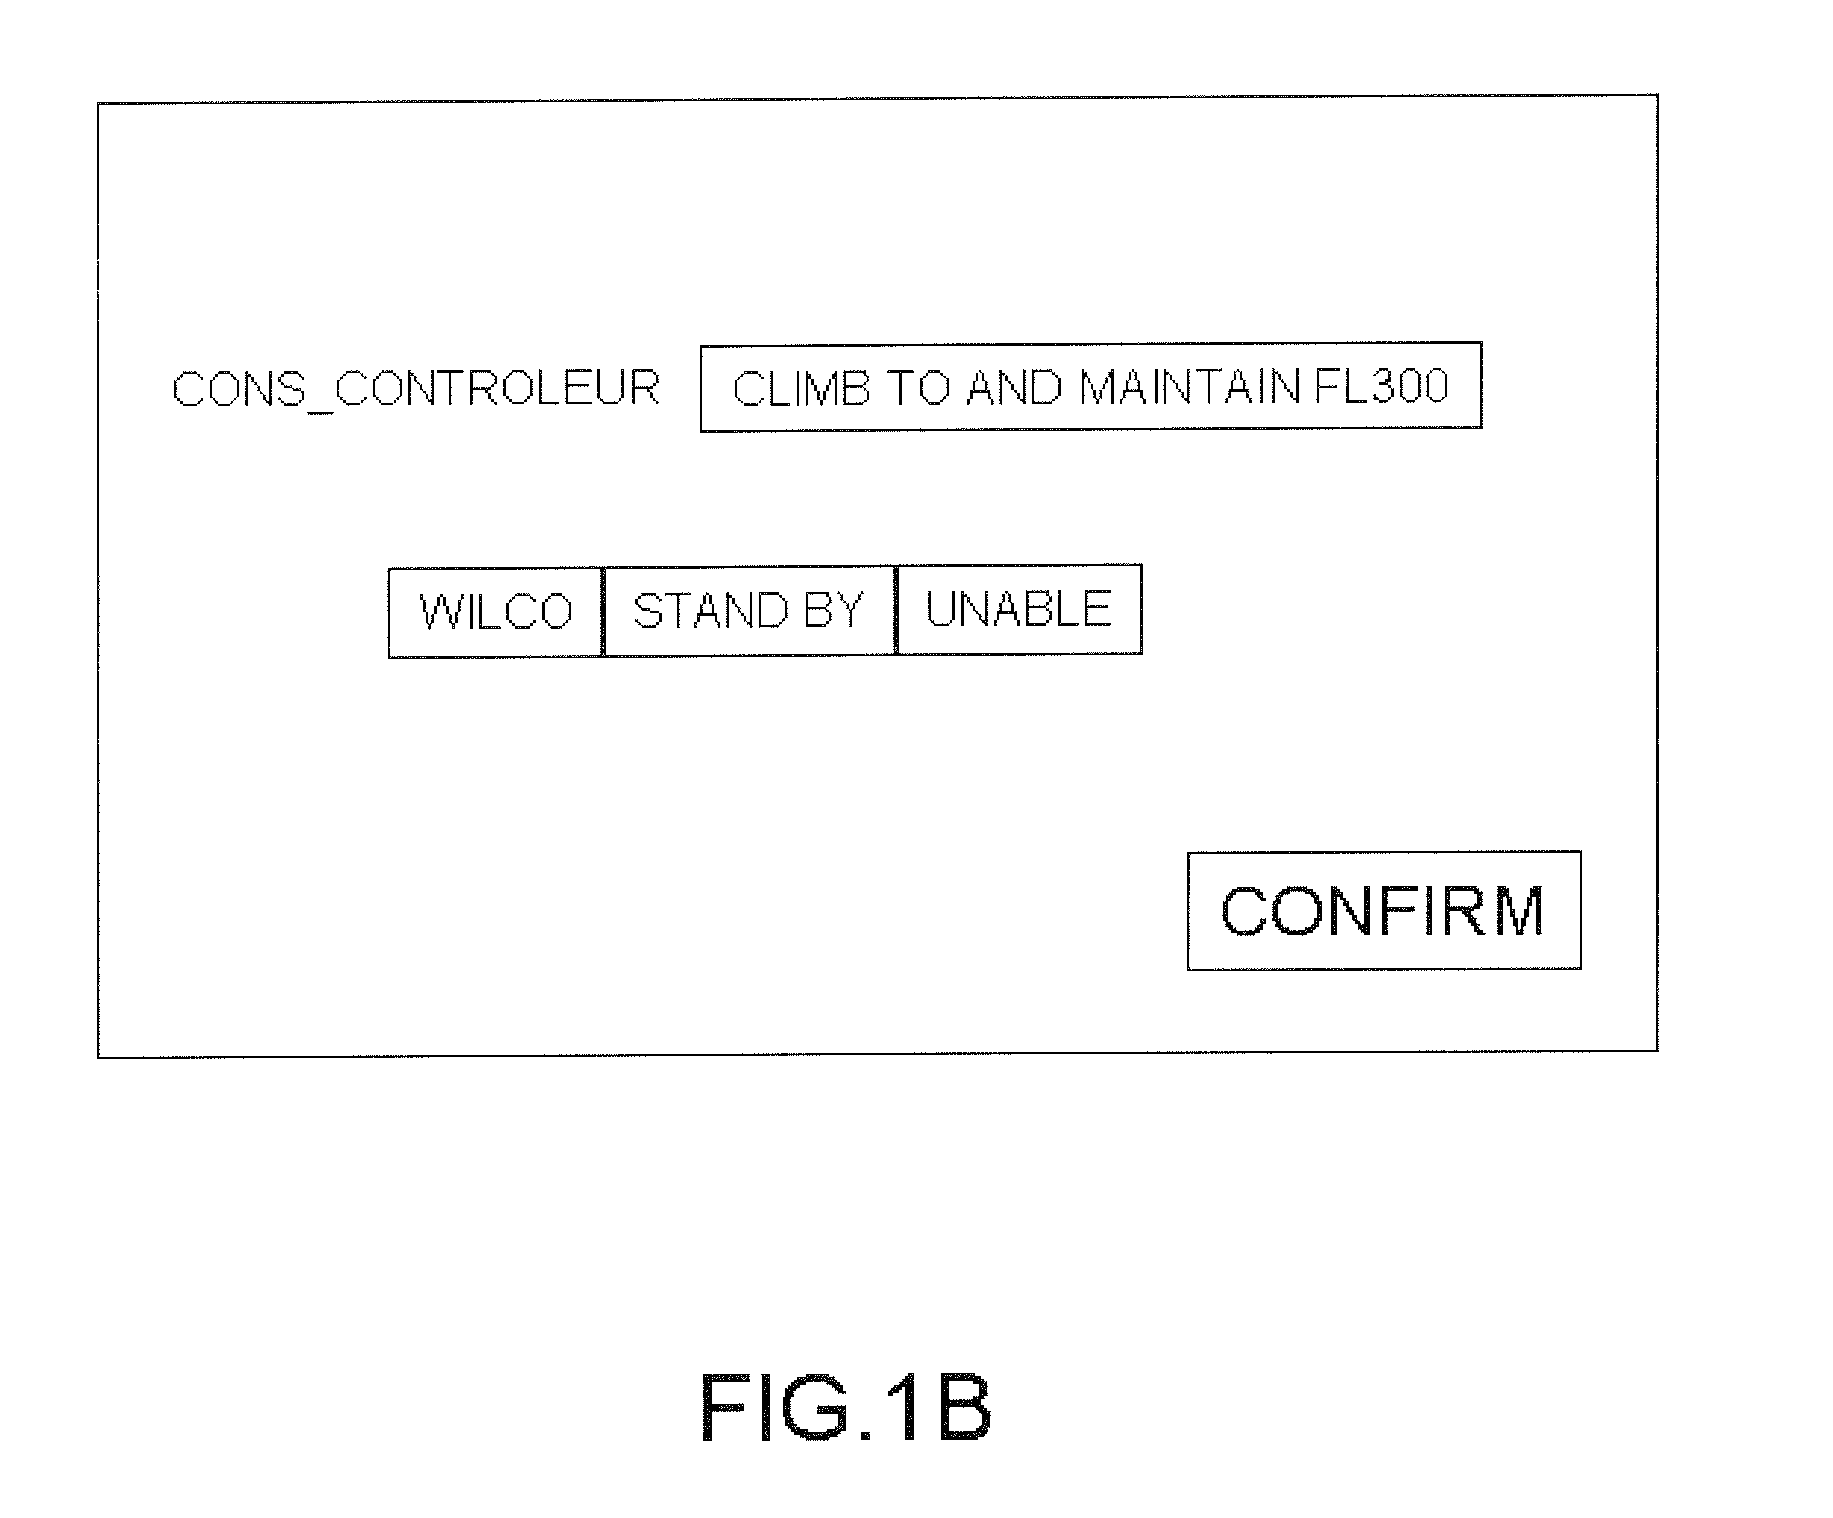 System for securing the display of instructions originating from air traffic control